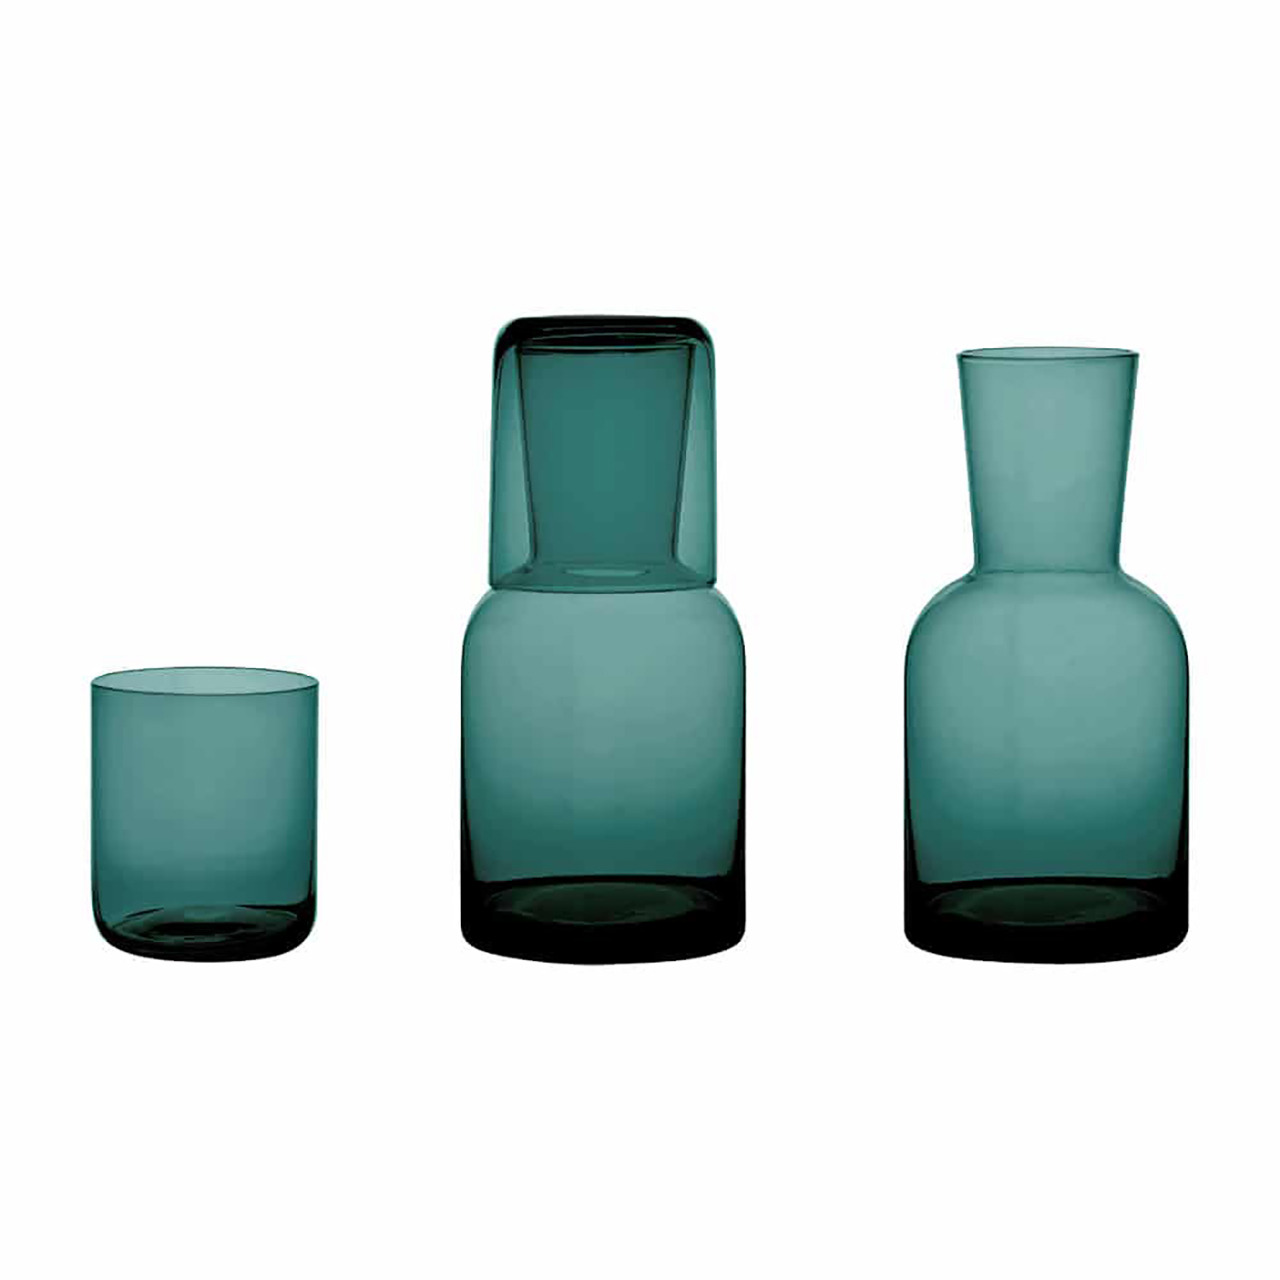 Teal carafe and tumbler set by Annabel Trends